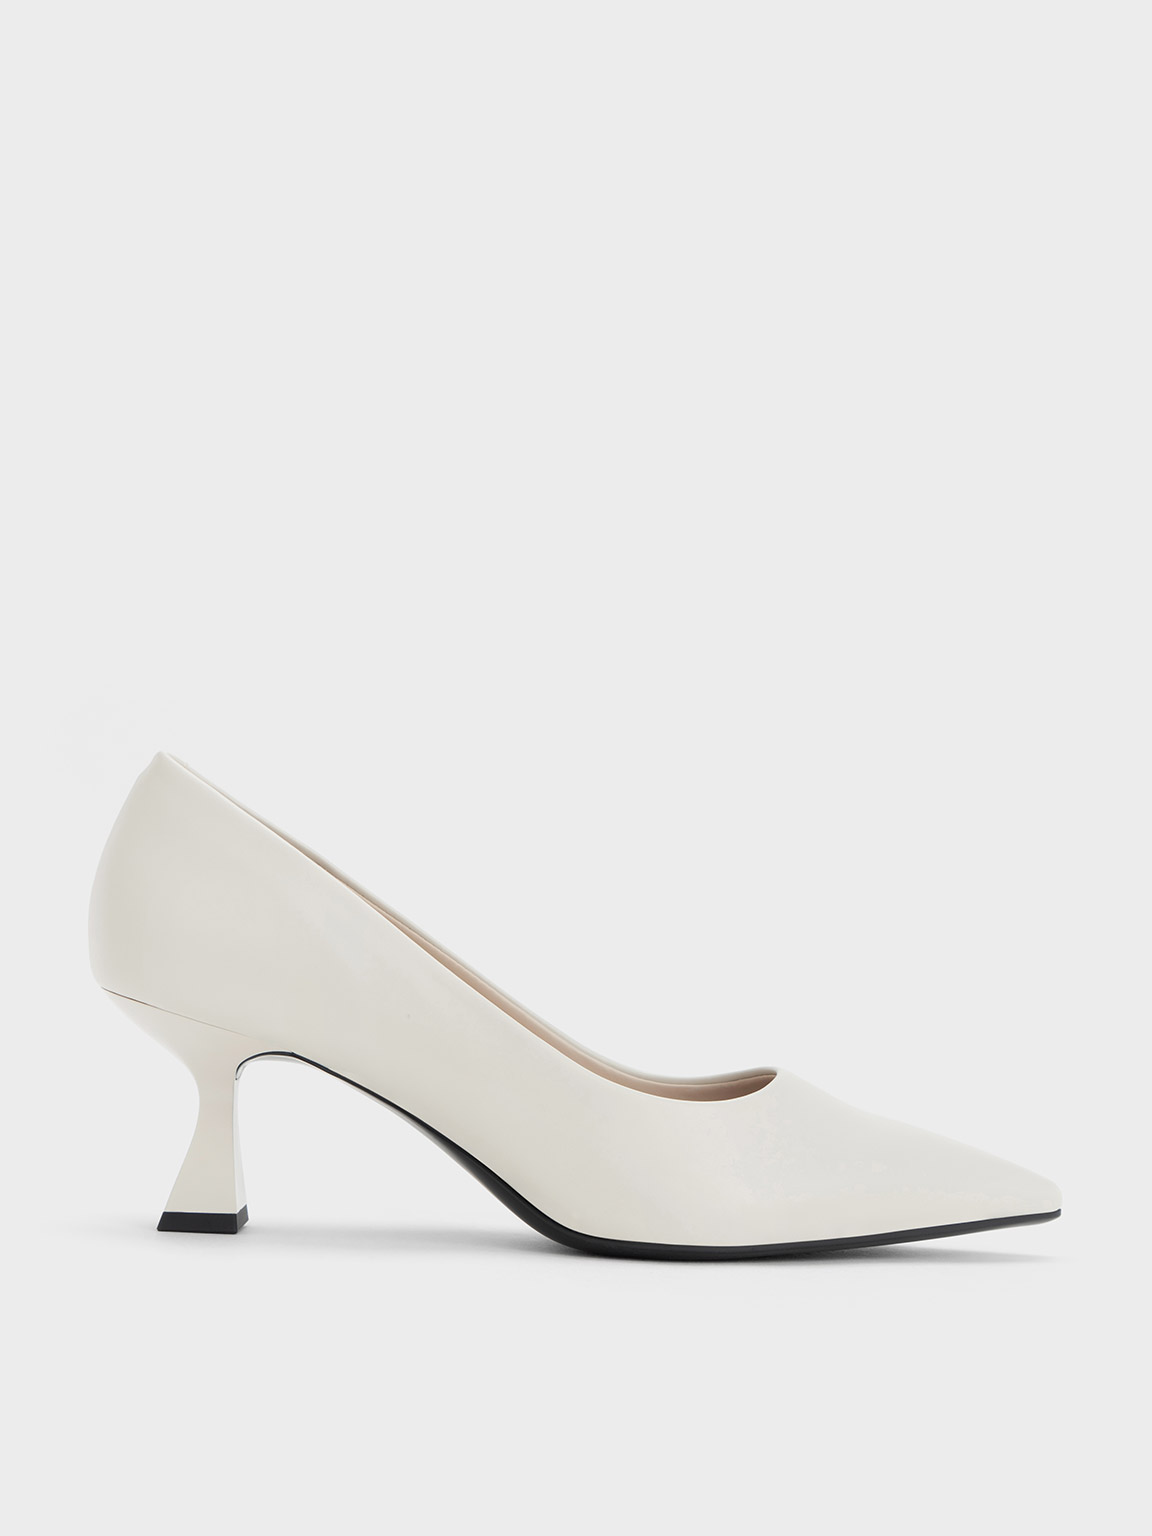 Nude Emmy Pointed Kitten Heel Pumps - CHARLES & KEITH IN